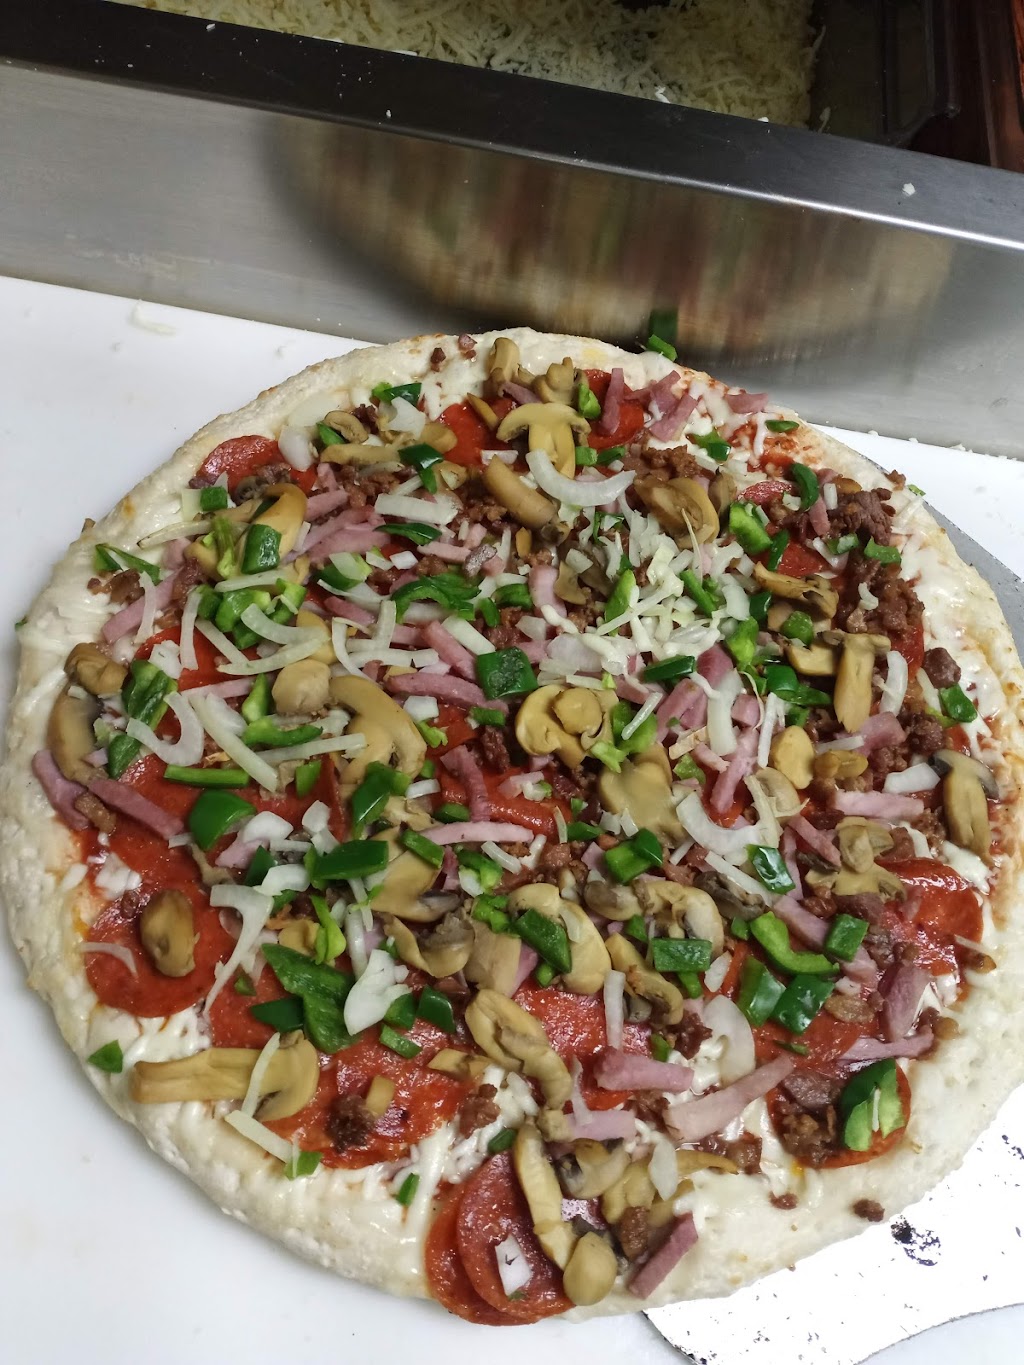 Happys Pizza | 3002 Oberlin Ave, Lorain, OH 44052, USA | Phone: (440) 282-6600